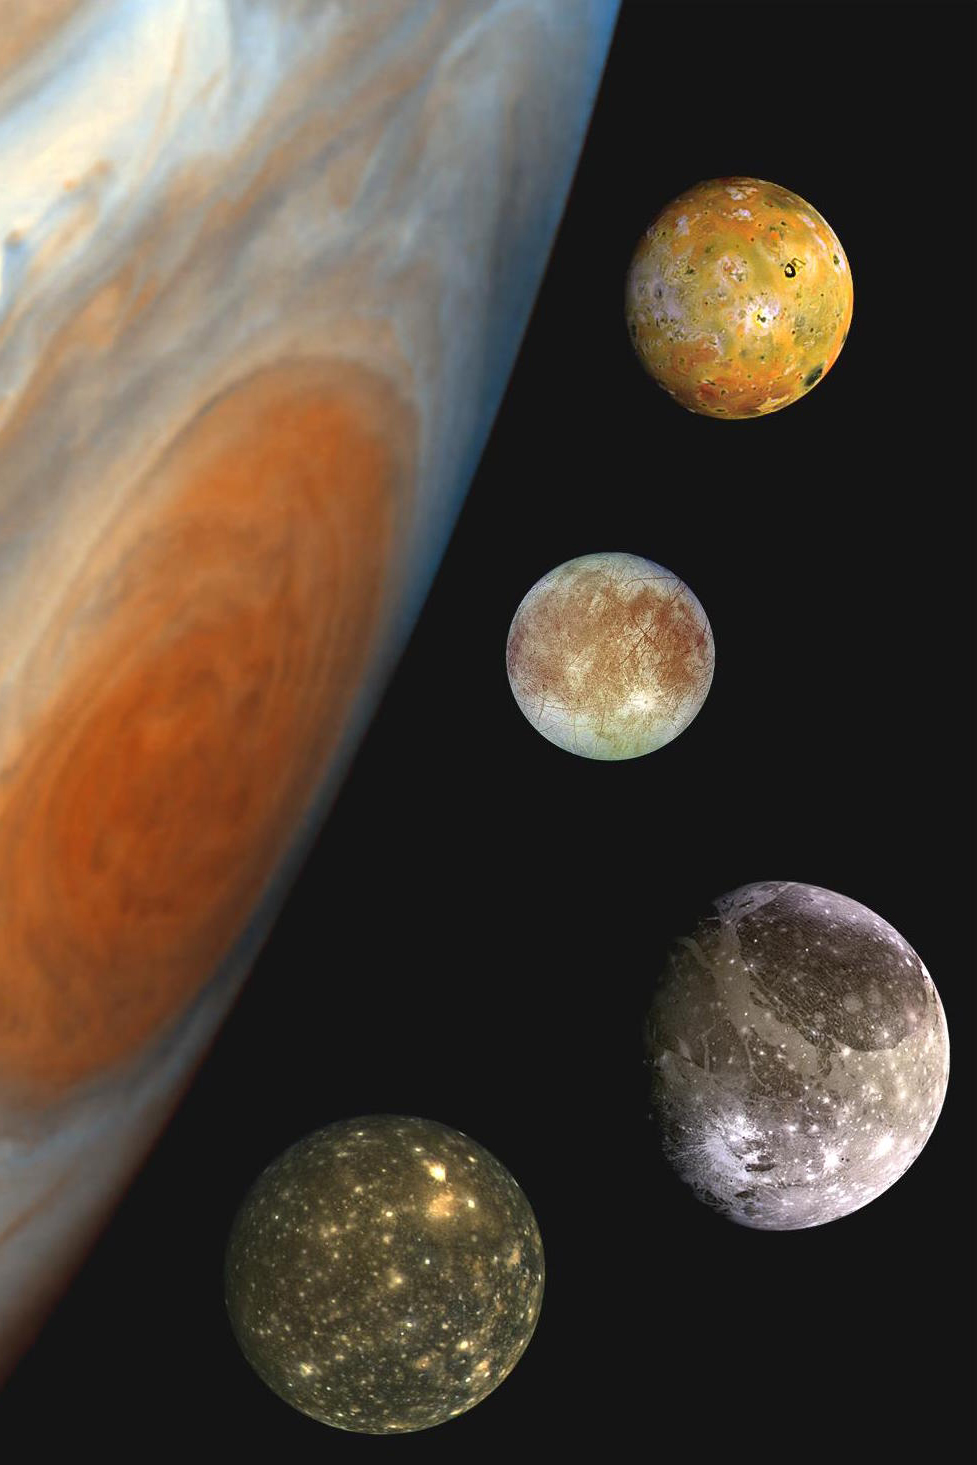 Graphical representation of Jupiter and its four largest moons Io, Europa, Ganymede and Callisto.